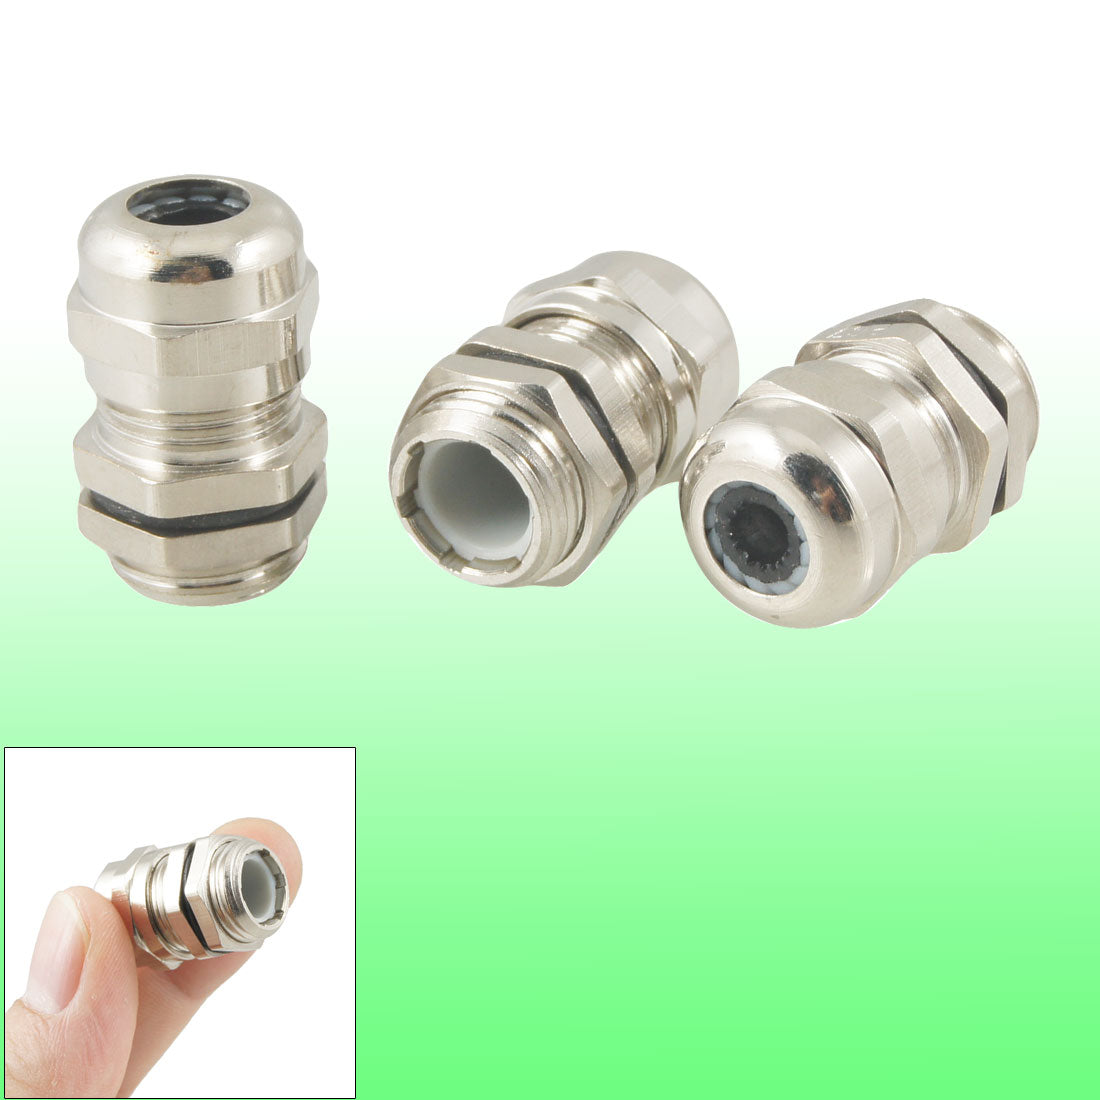 uxcell Uxcell 3 Pcs PG7 3.0-6.5mm Nickel-plated Brass Waterproof Connector Cable Gland